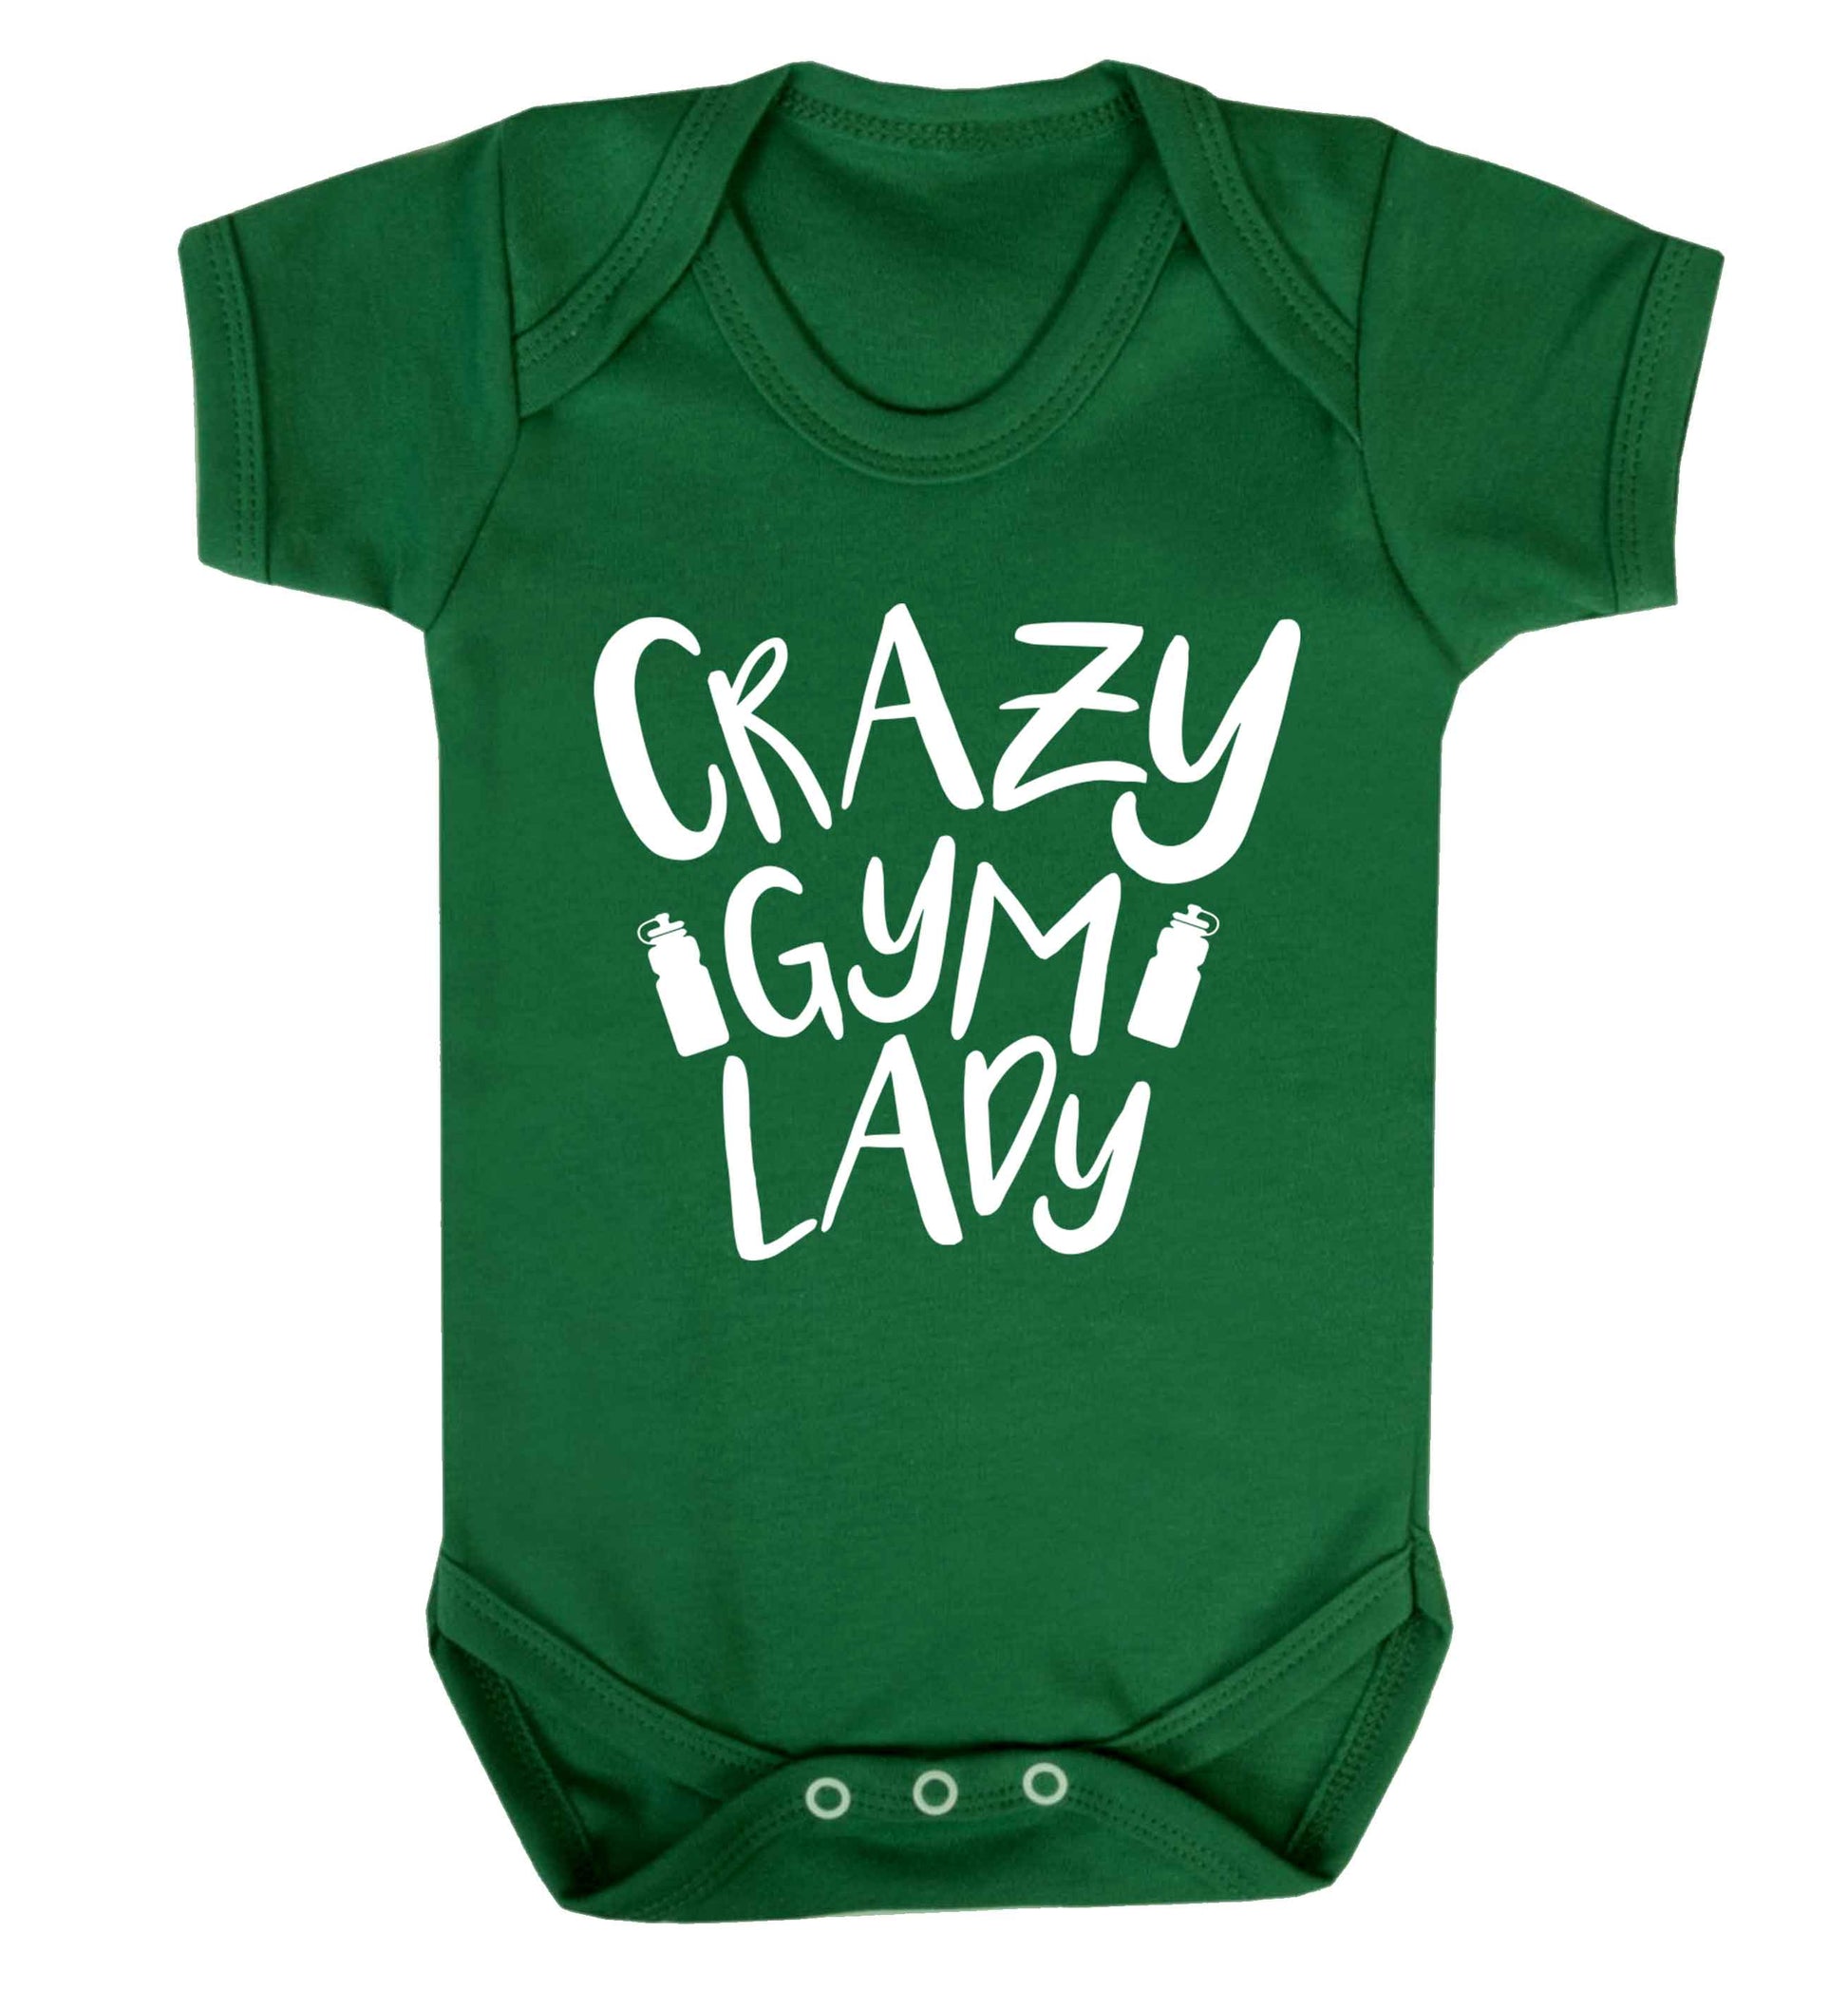 Crazy gym lady Baby Vest green 18-24 months